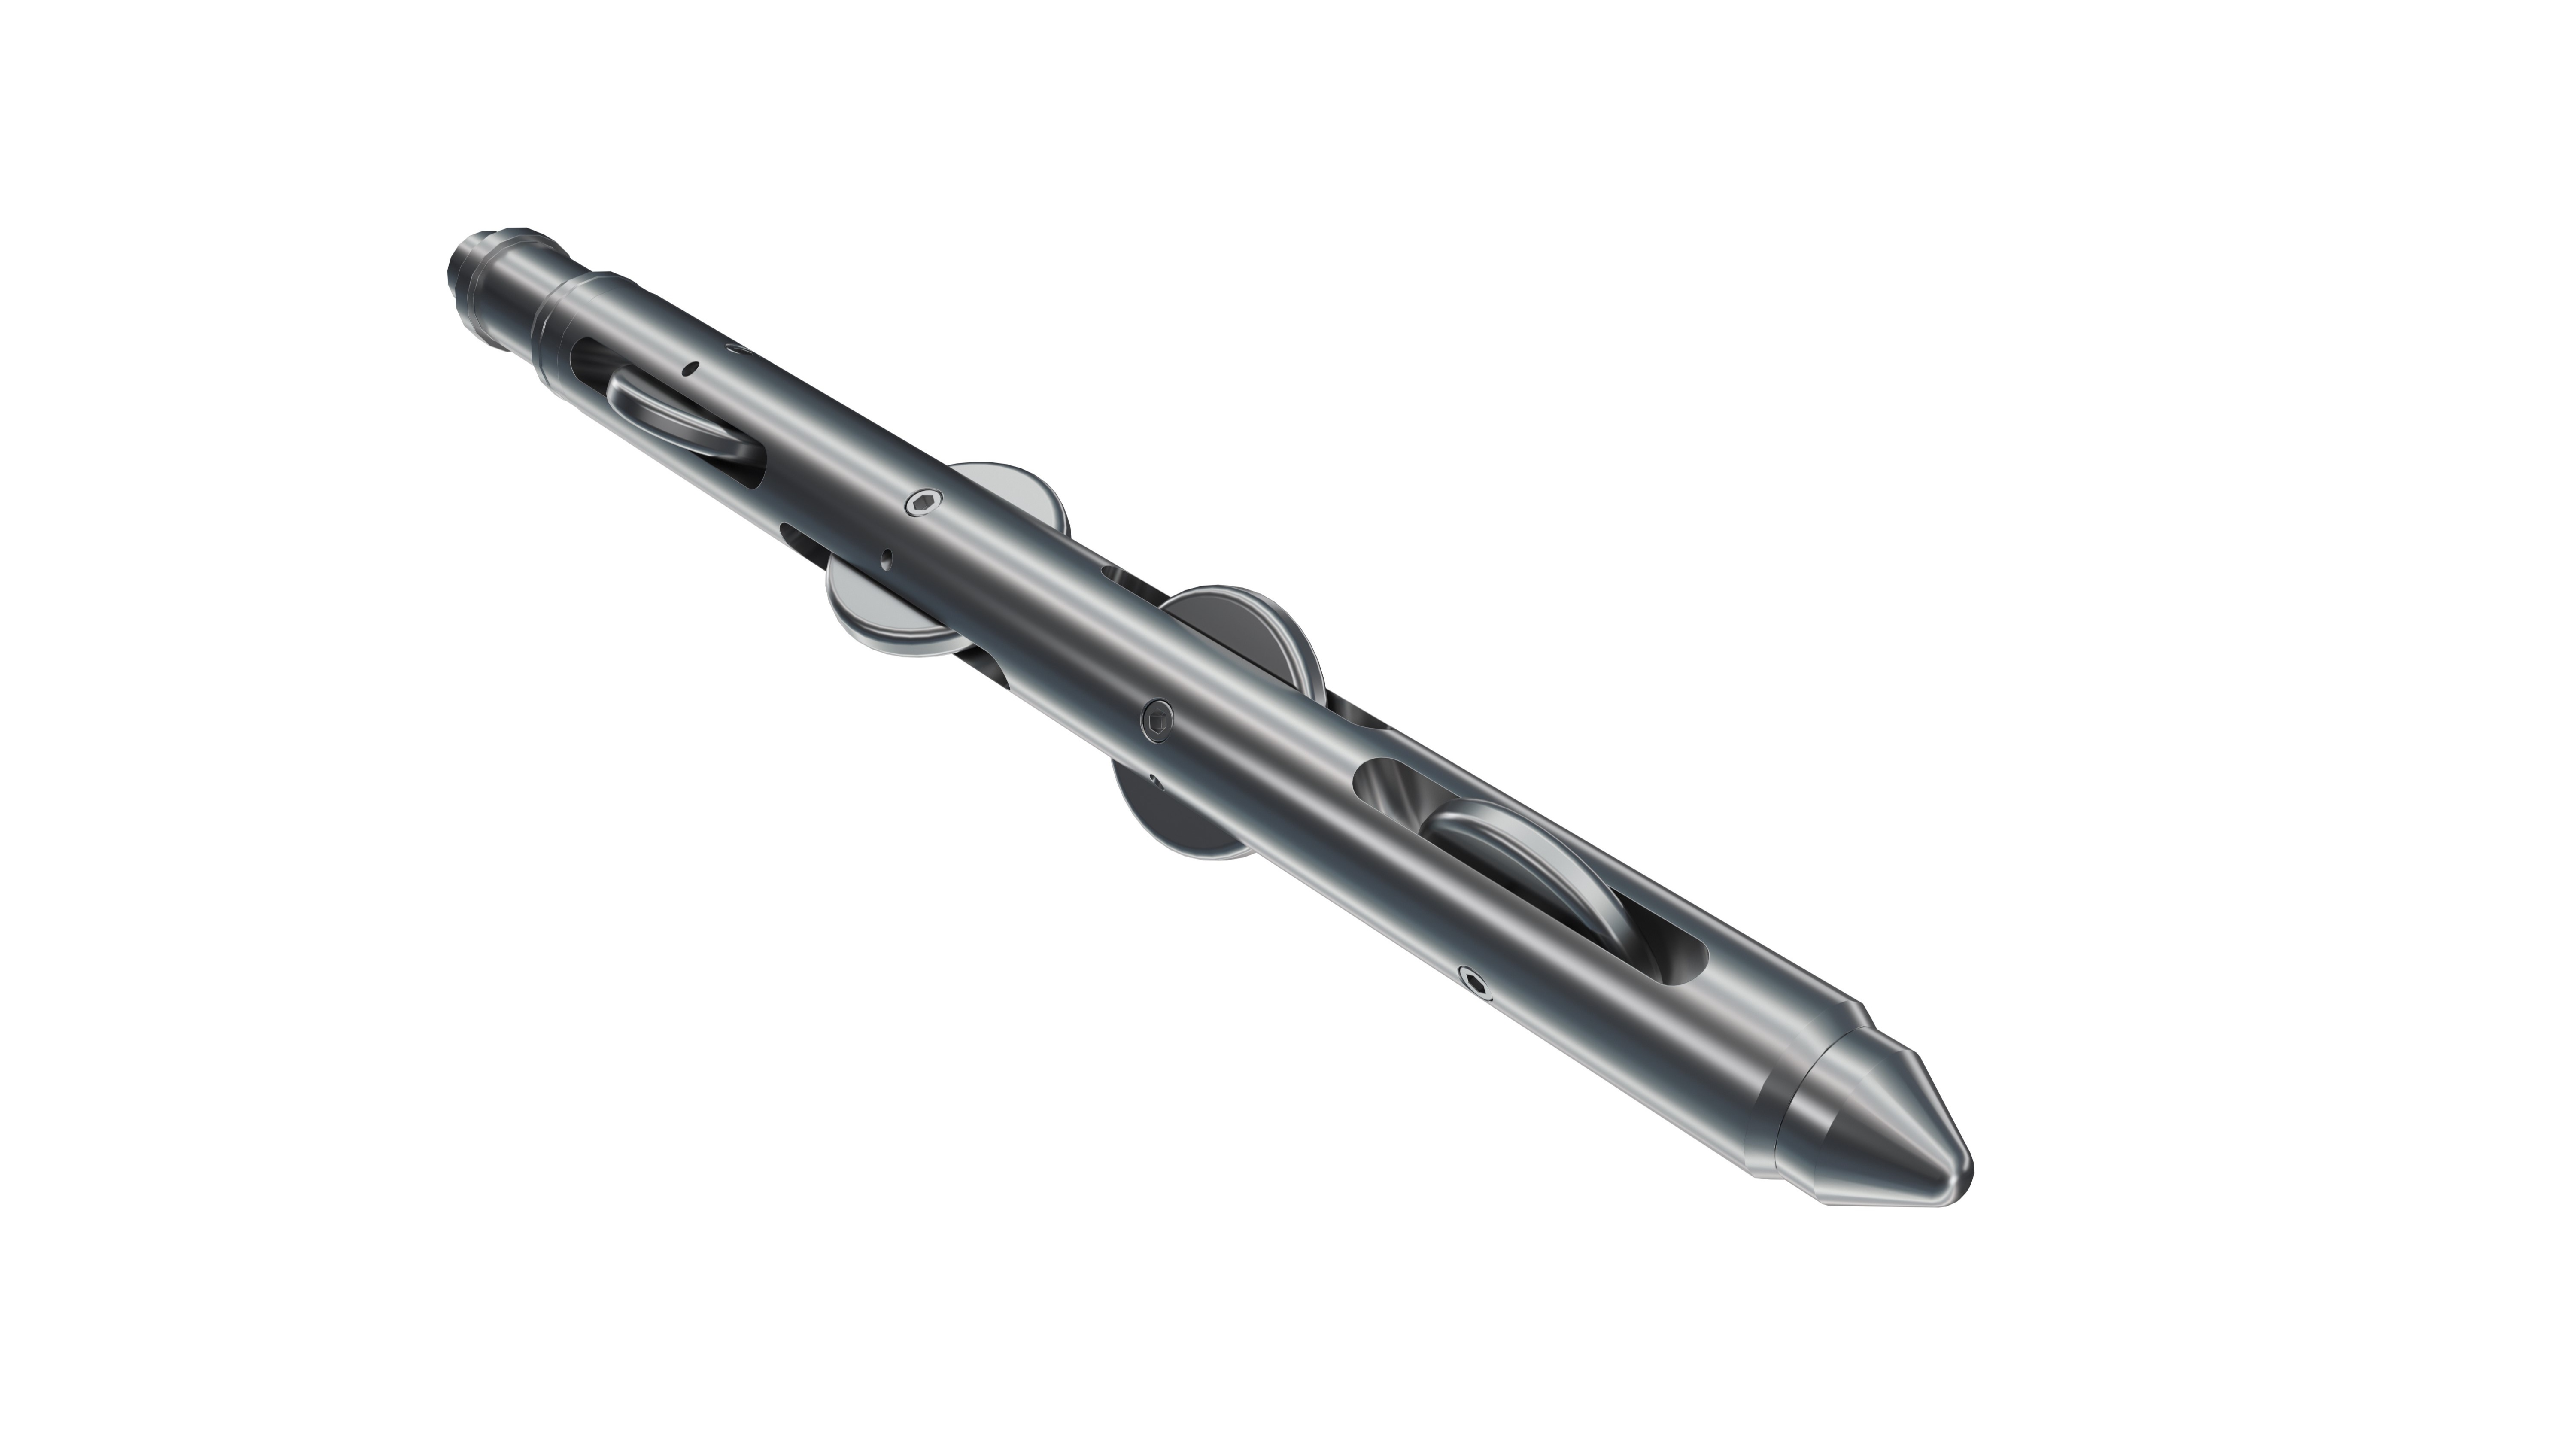 An  image of Interwell's Roller Stem tool